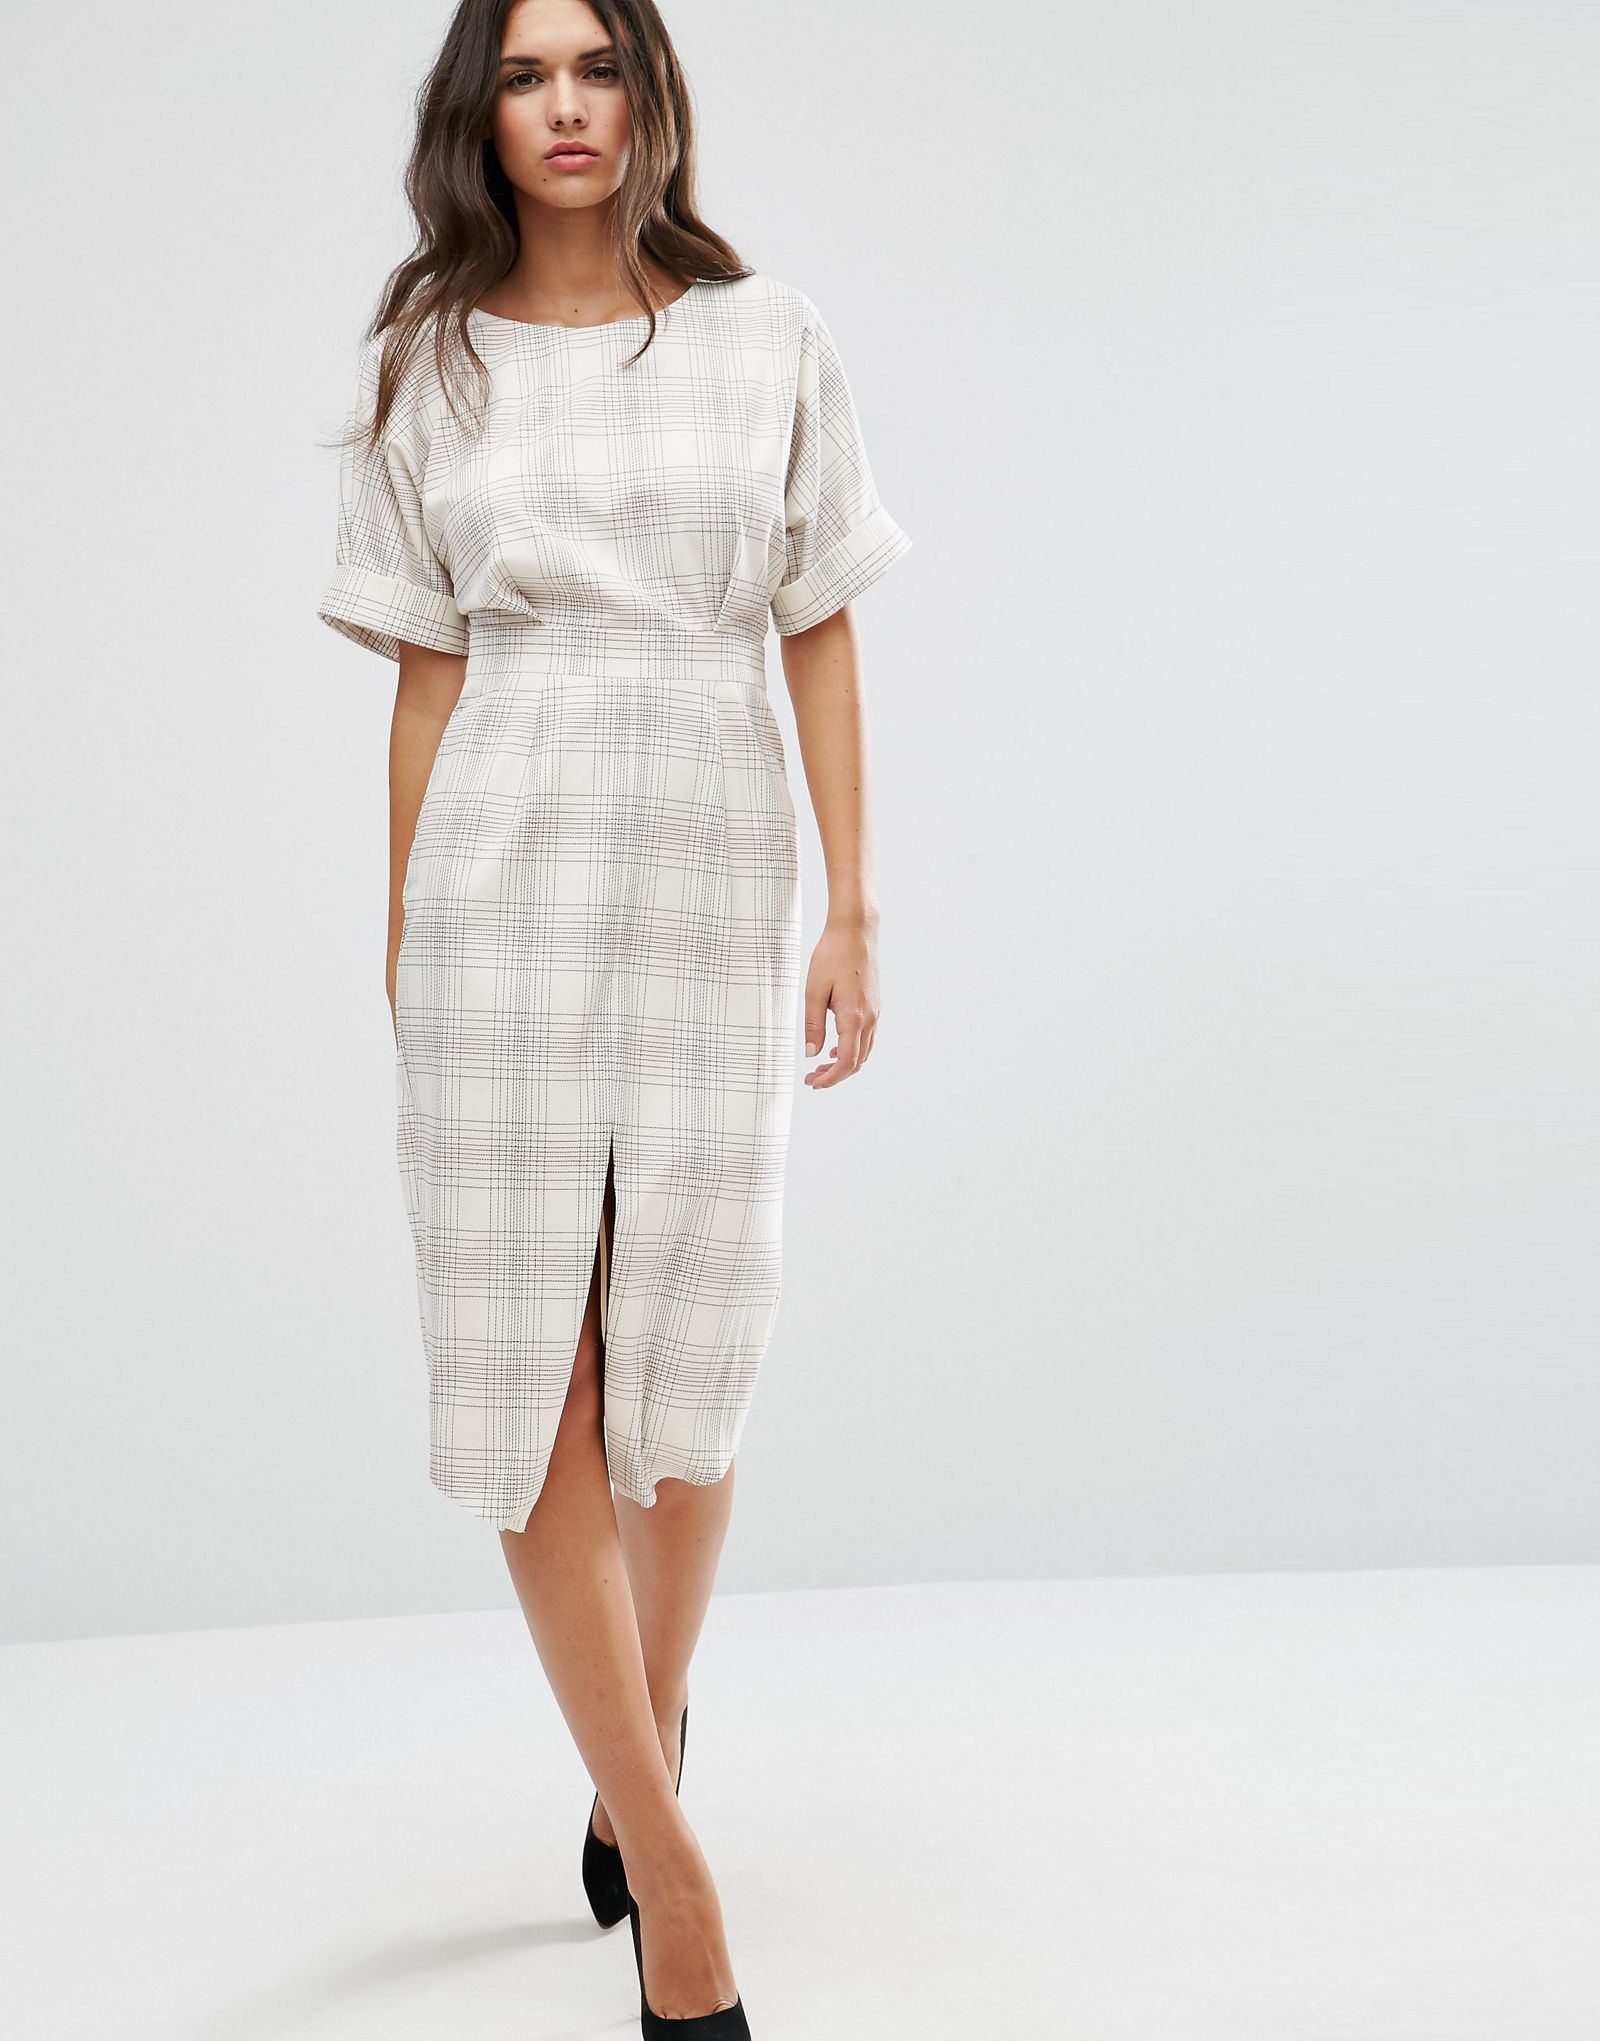 ASOS Wiggle Dress in Check